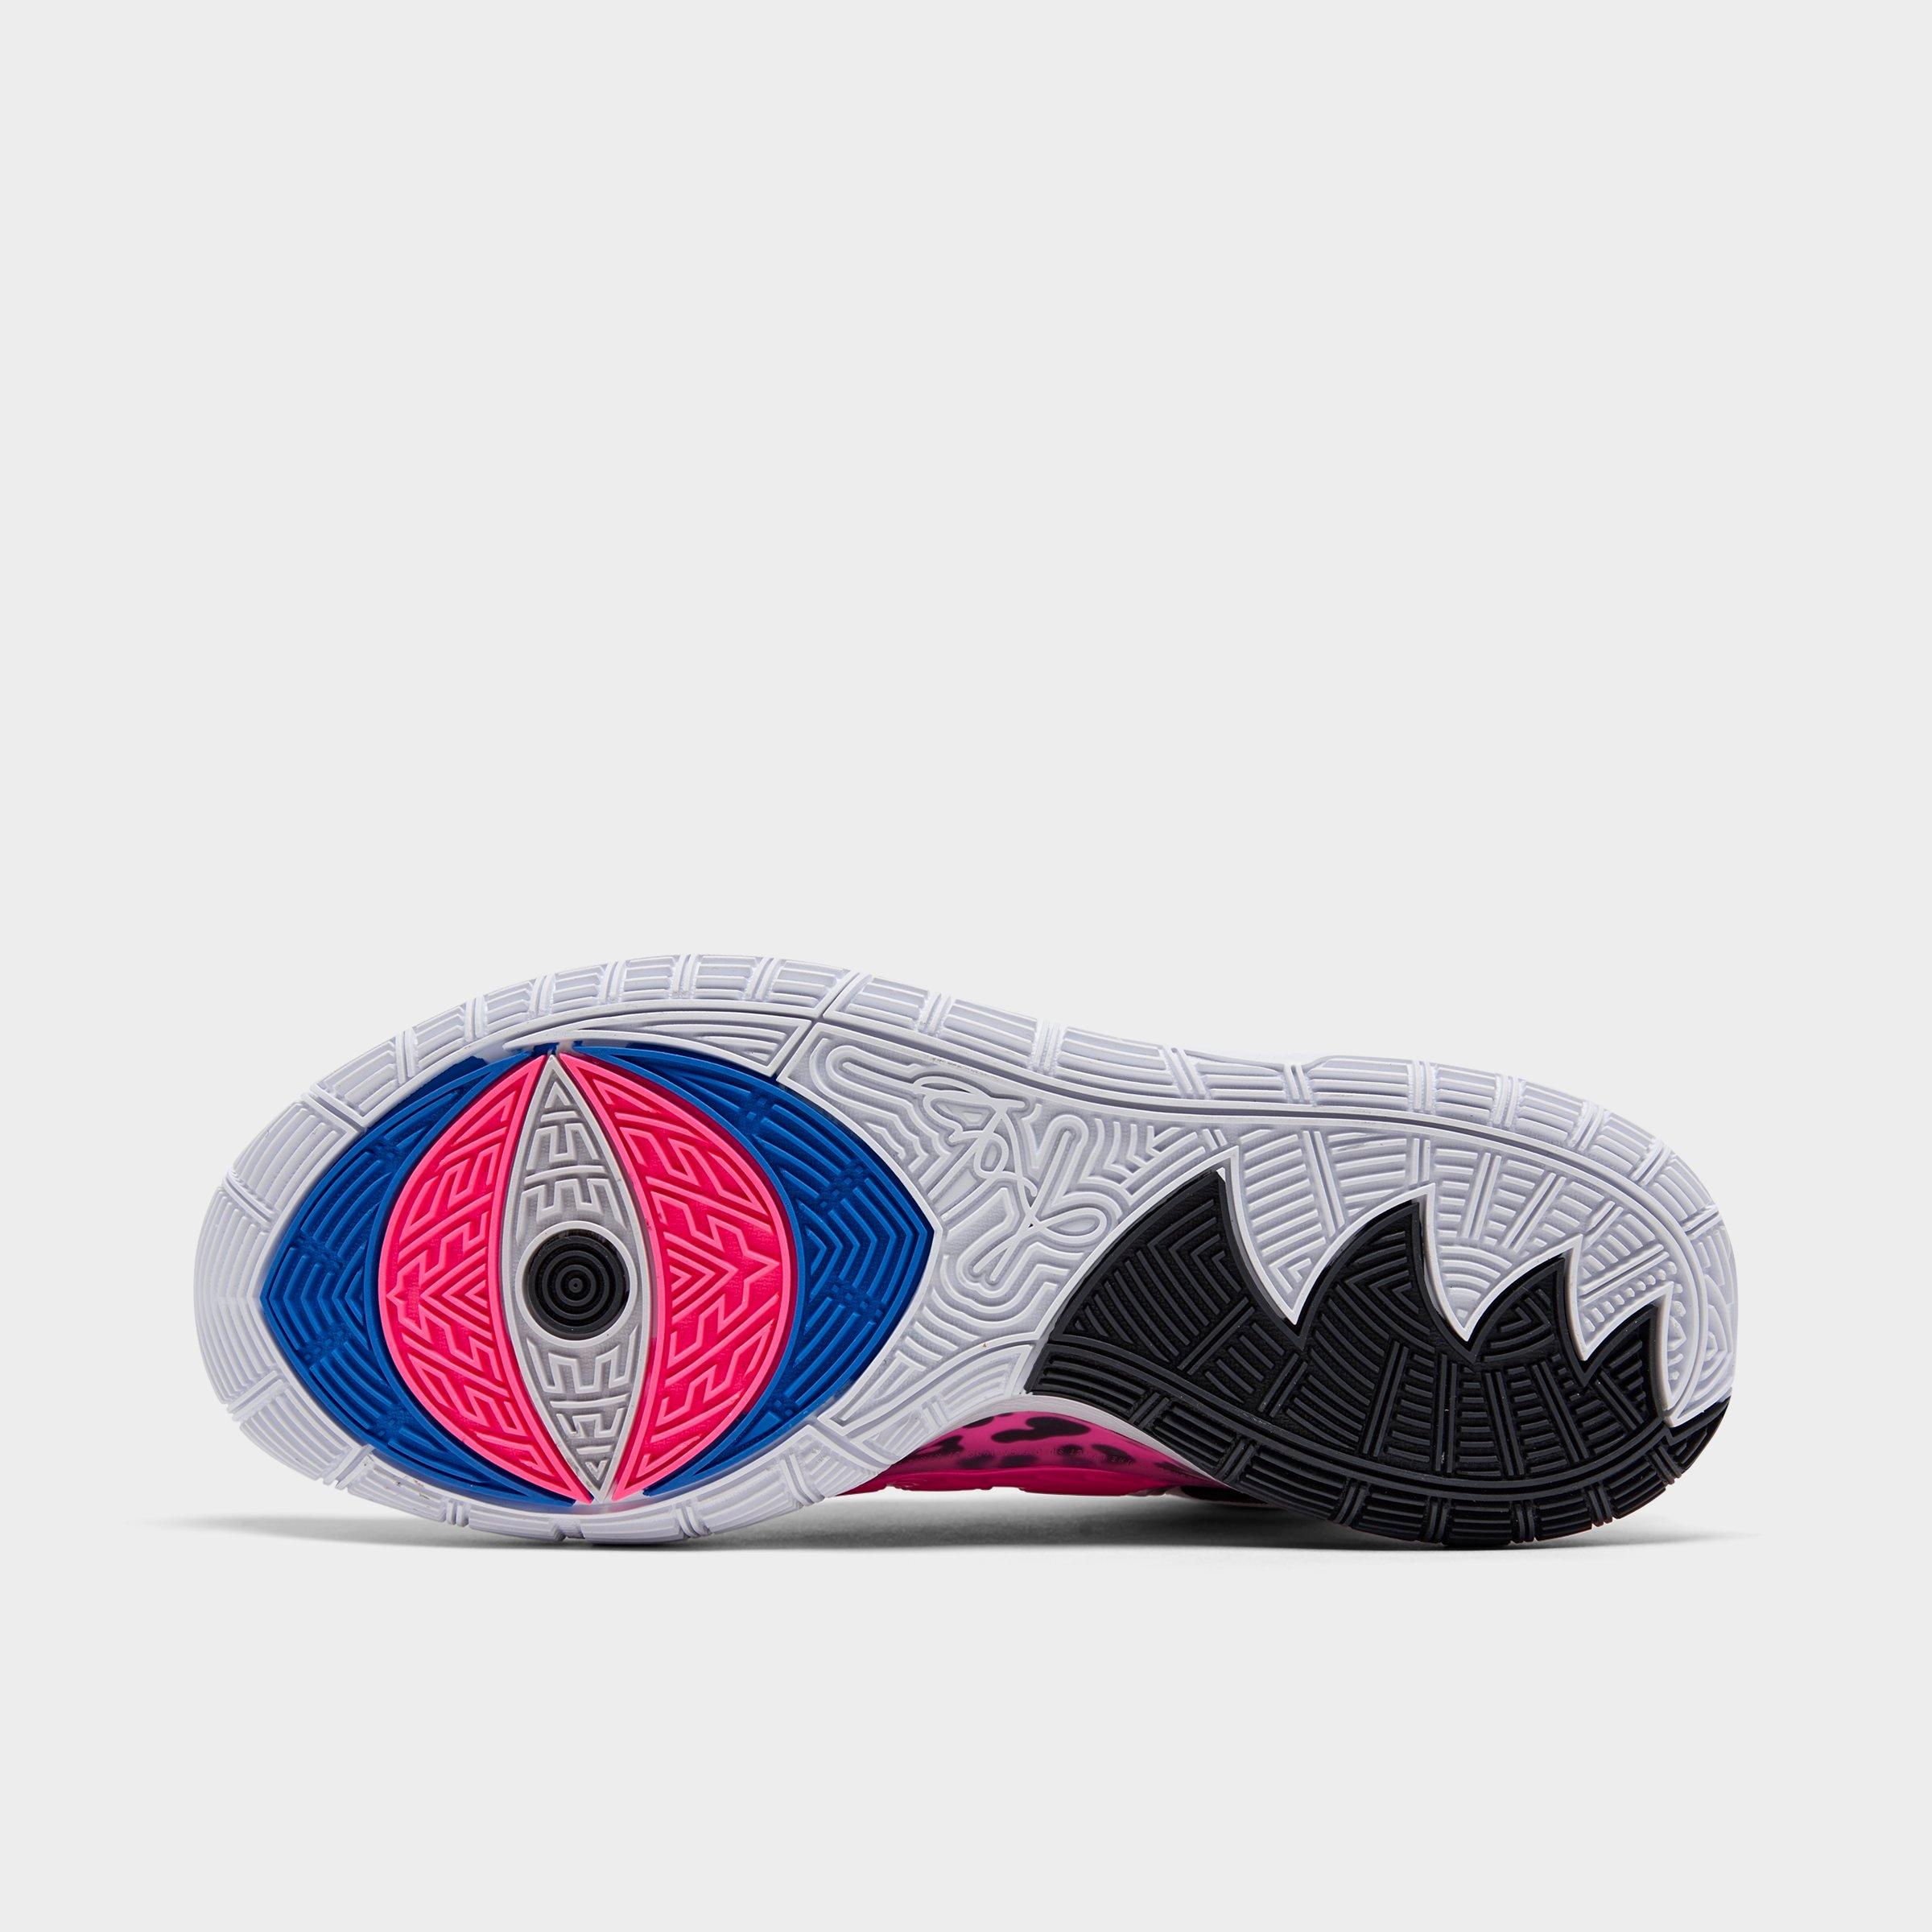 Nike Nike Kyrie 6 Ep Yellow Chinese New Year 2020 Grailed